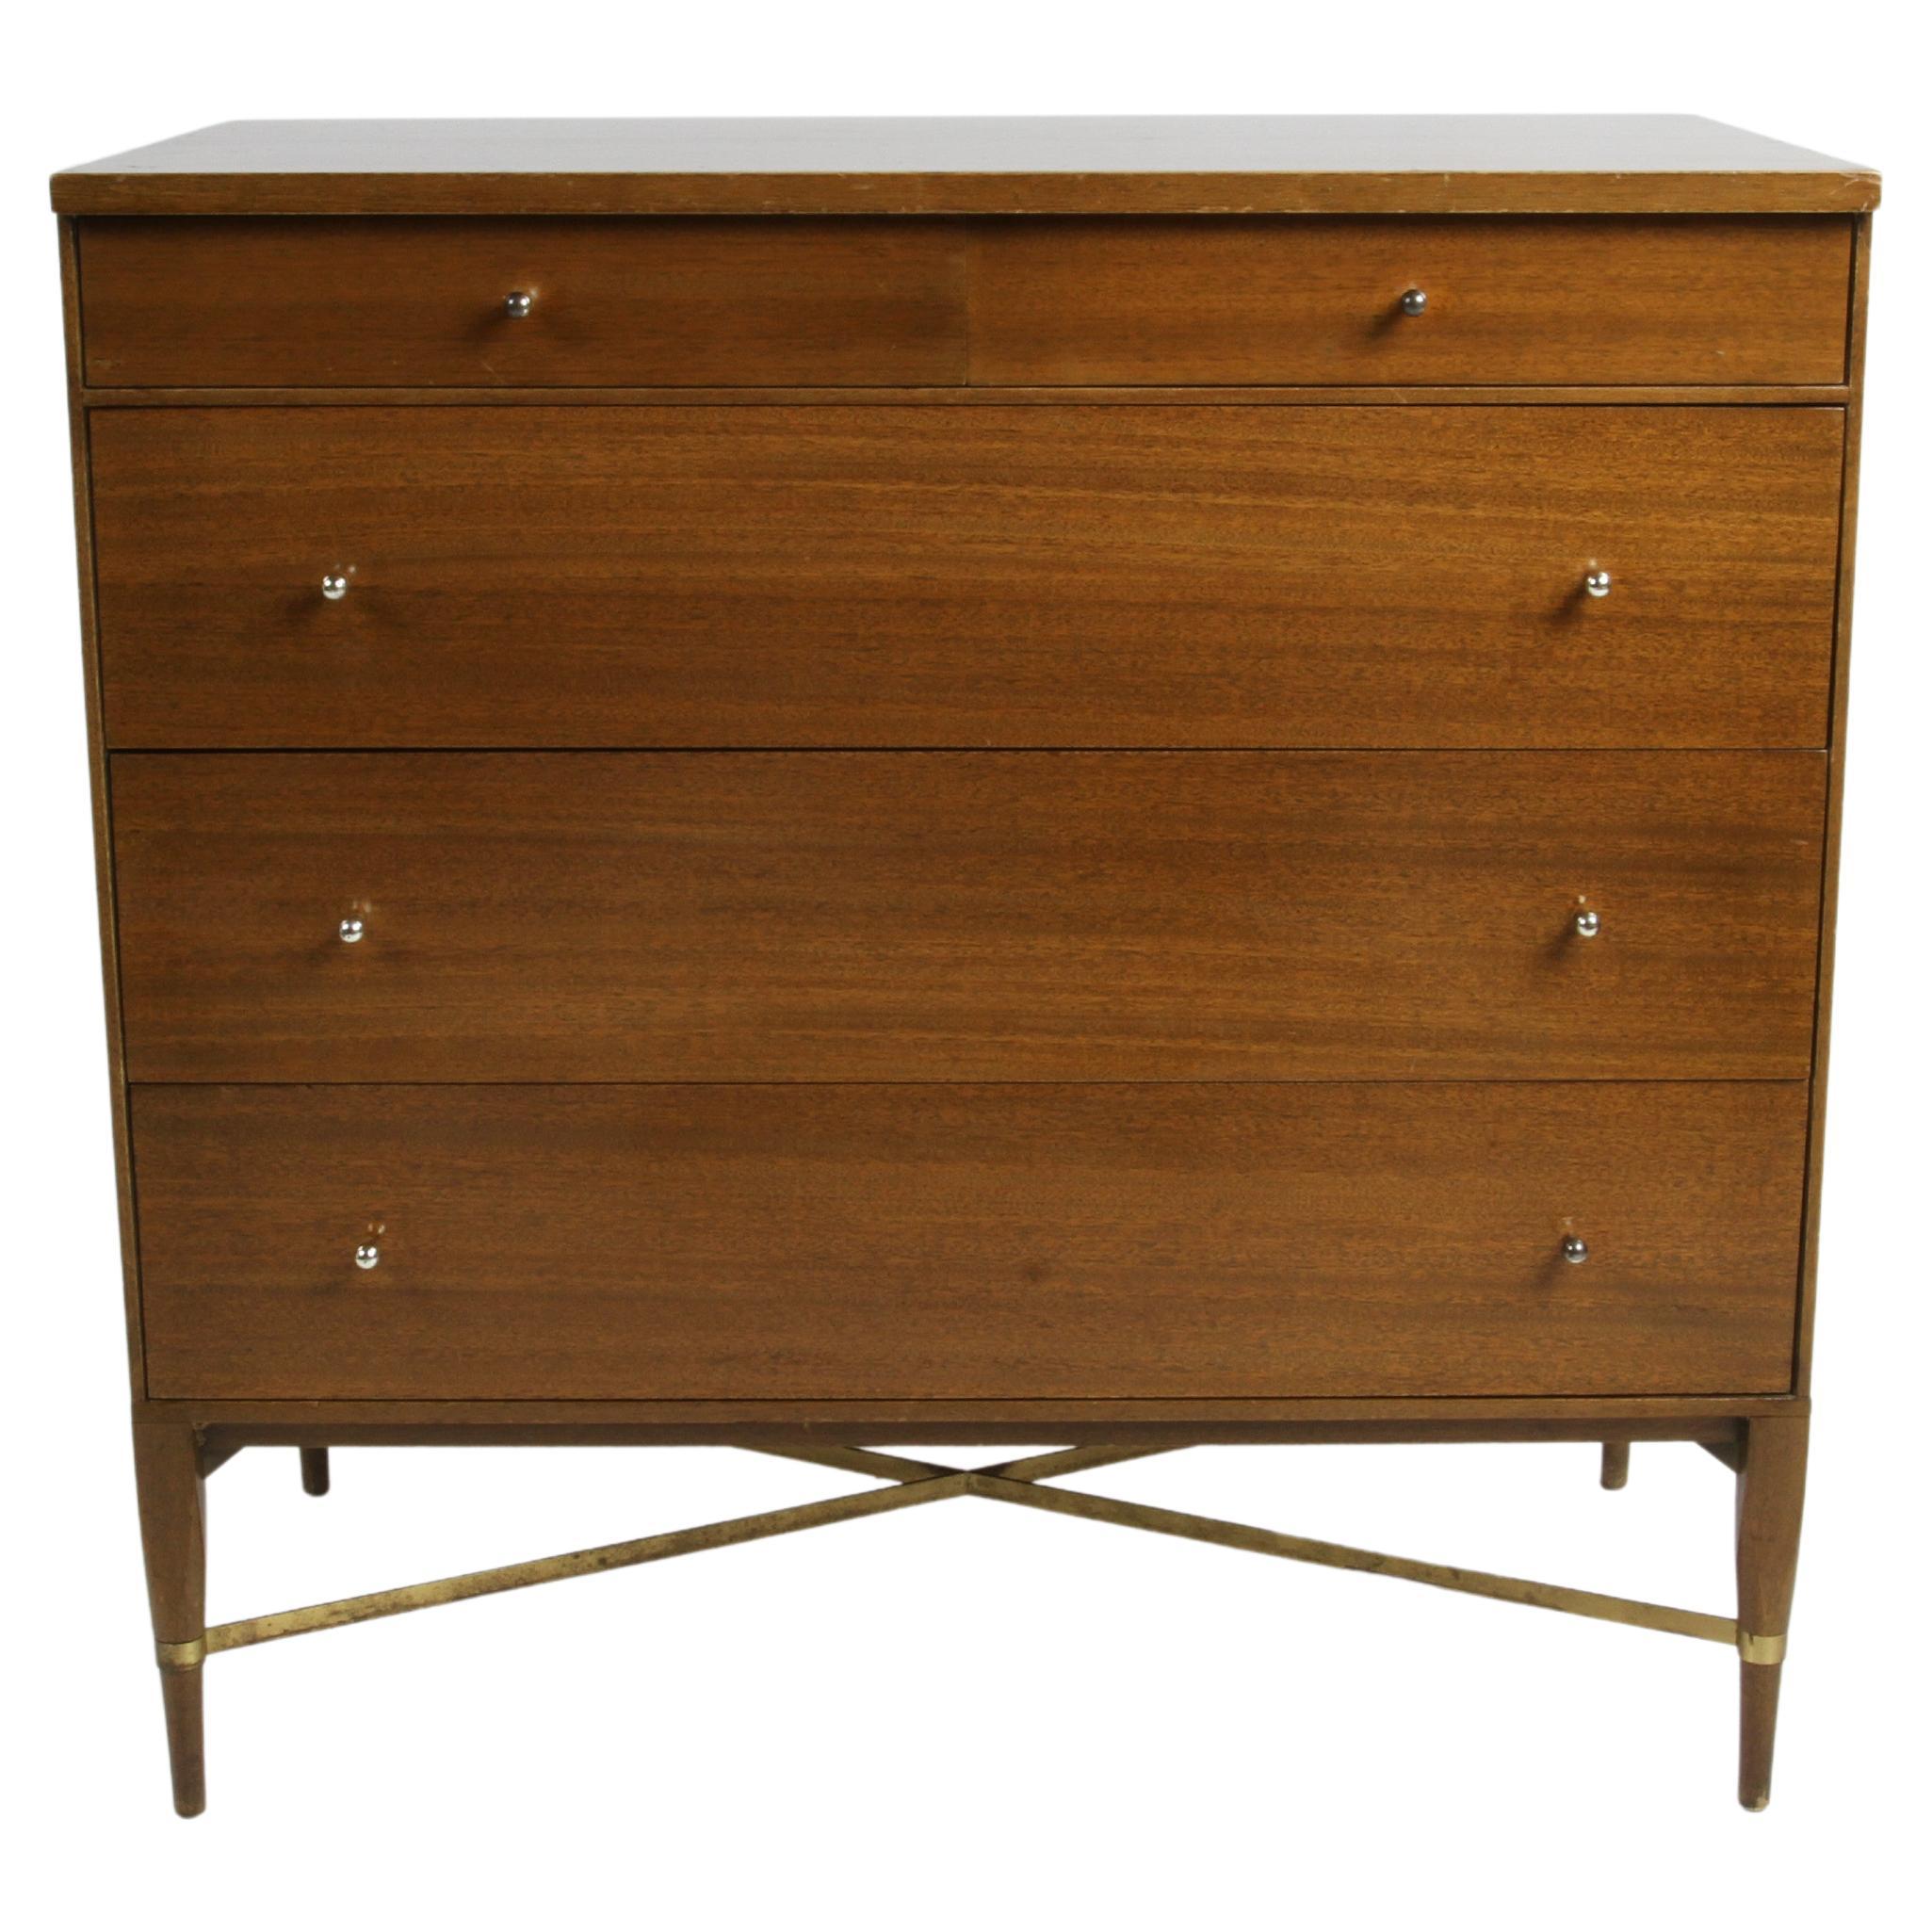 Paul McCobb for Calvin #1003 Chest of Drawers or Dresser with Brass X Stretcher